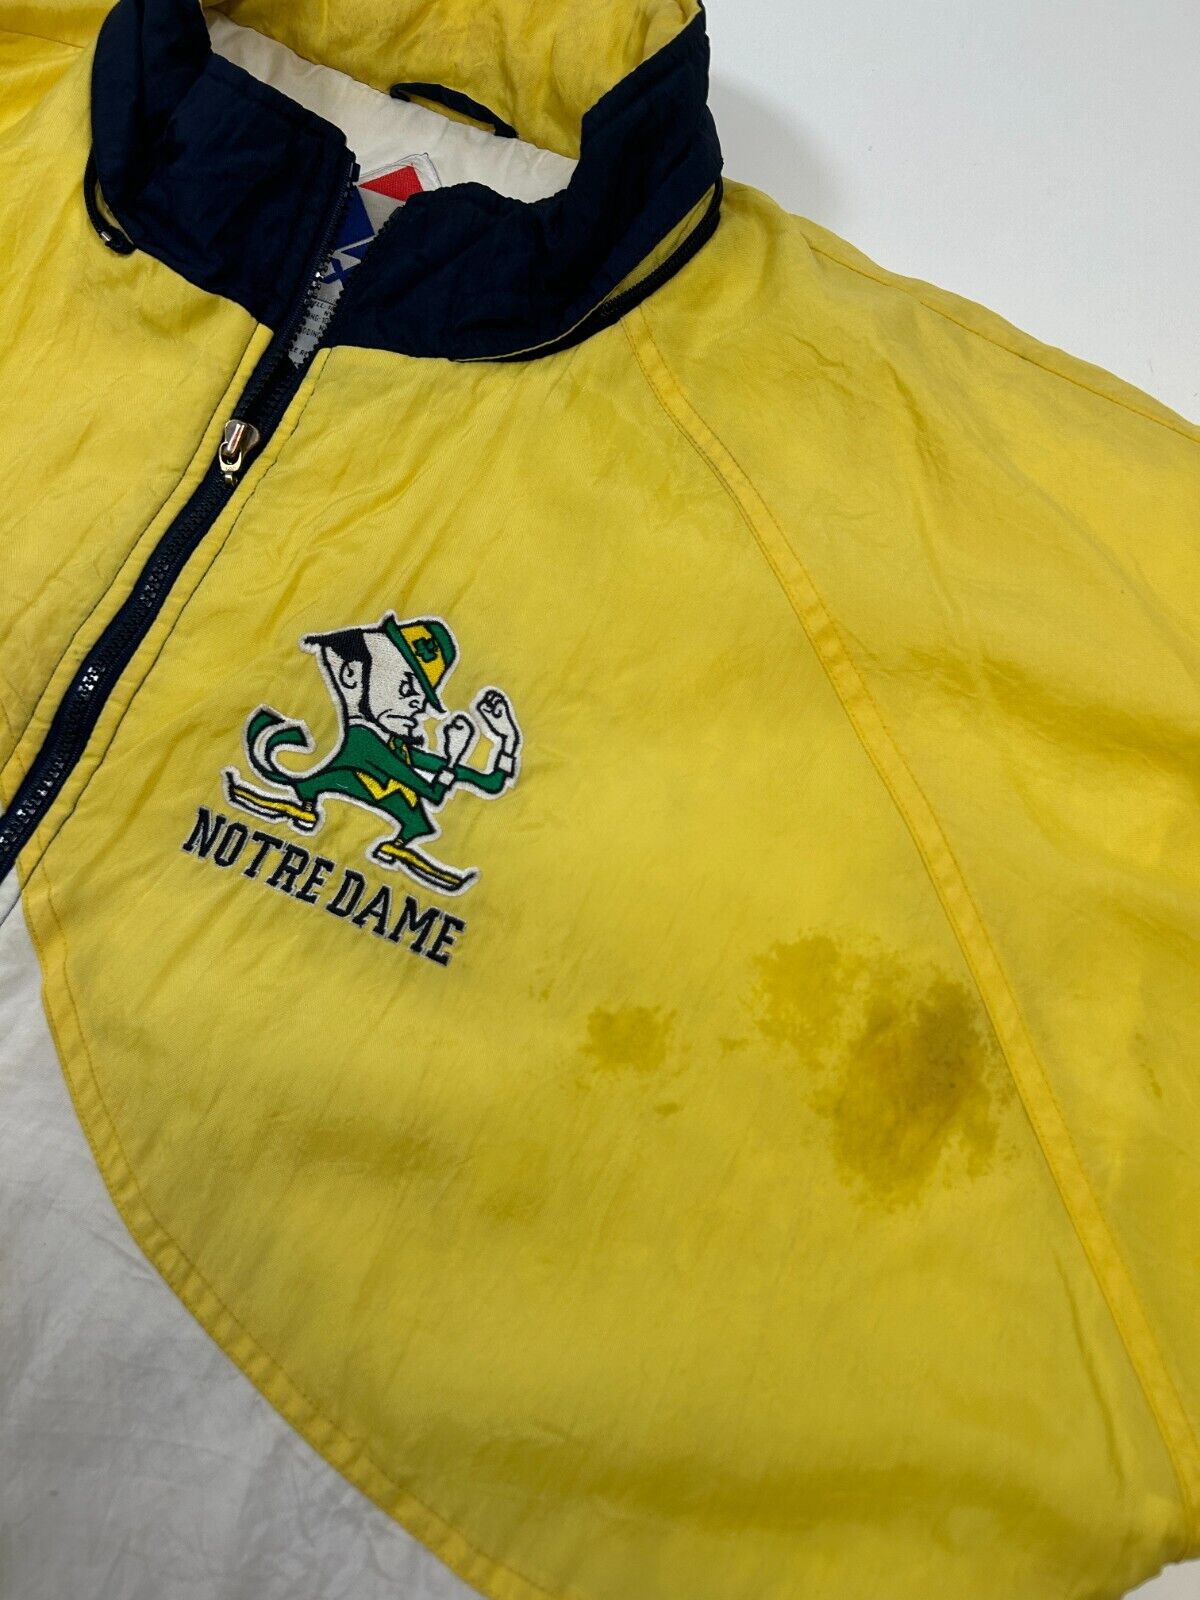 Vintage 90s Notre Dame Fighting Irish Apex One Insulated Jacket Size XL